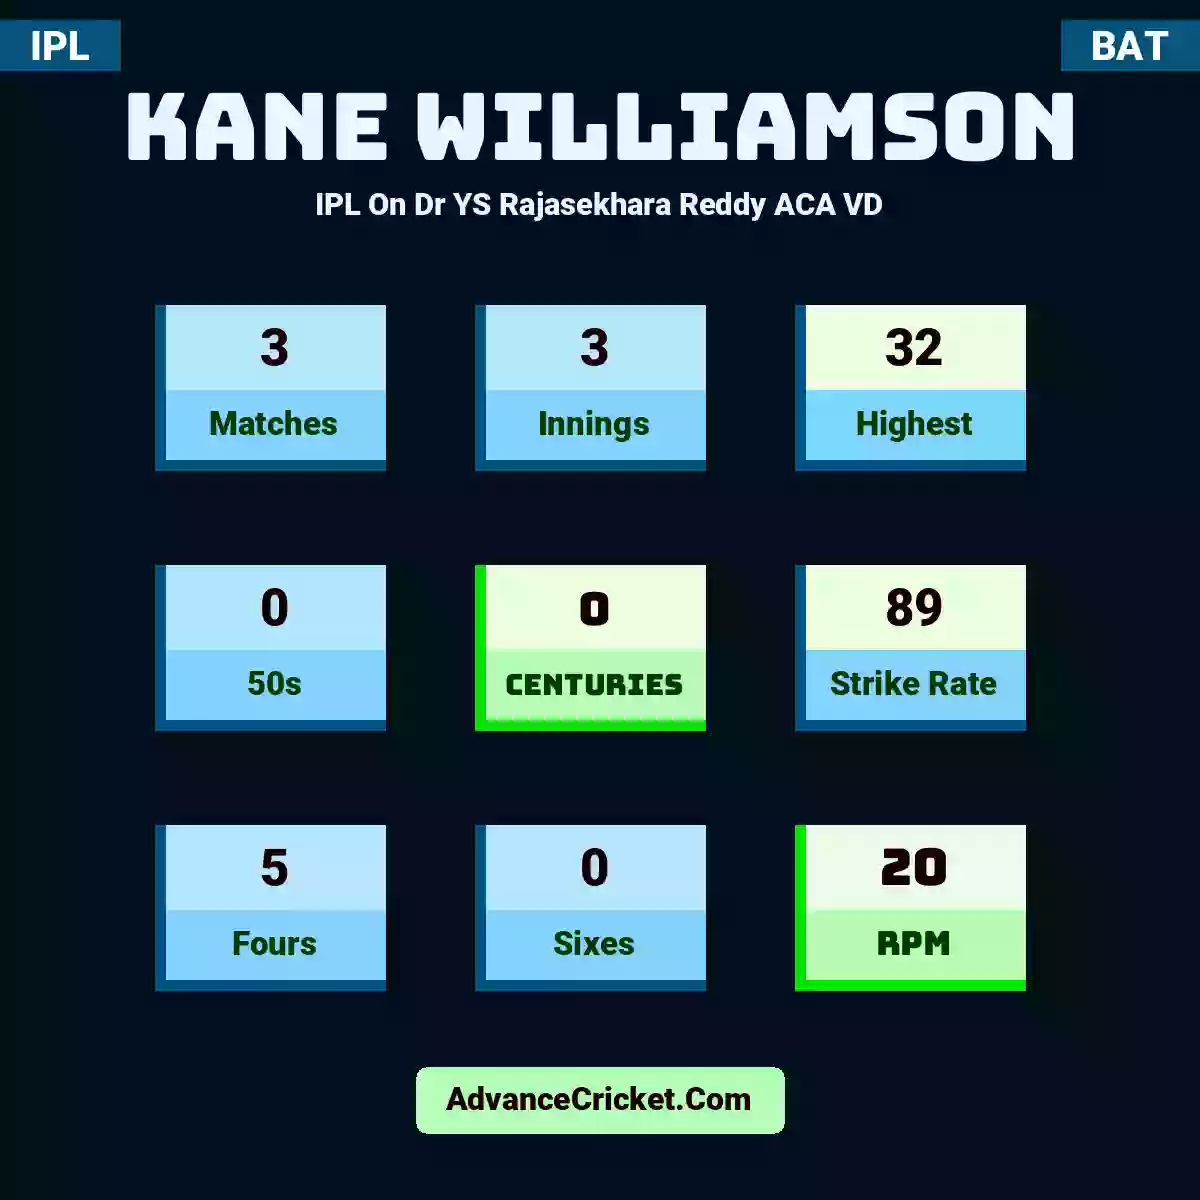 Kane Williamson IPL  On Dr YS Rajasekhara Reddy ACA VD, Kane Williamson played 3 matches, scored 32 runs as highest, 0 half-centuries, and 0 centuries, with a strike rate of 89. K.Williamson hit 5 fours and 0 sixes, with an RPM of 20.